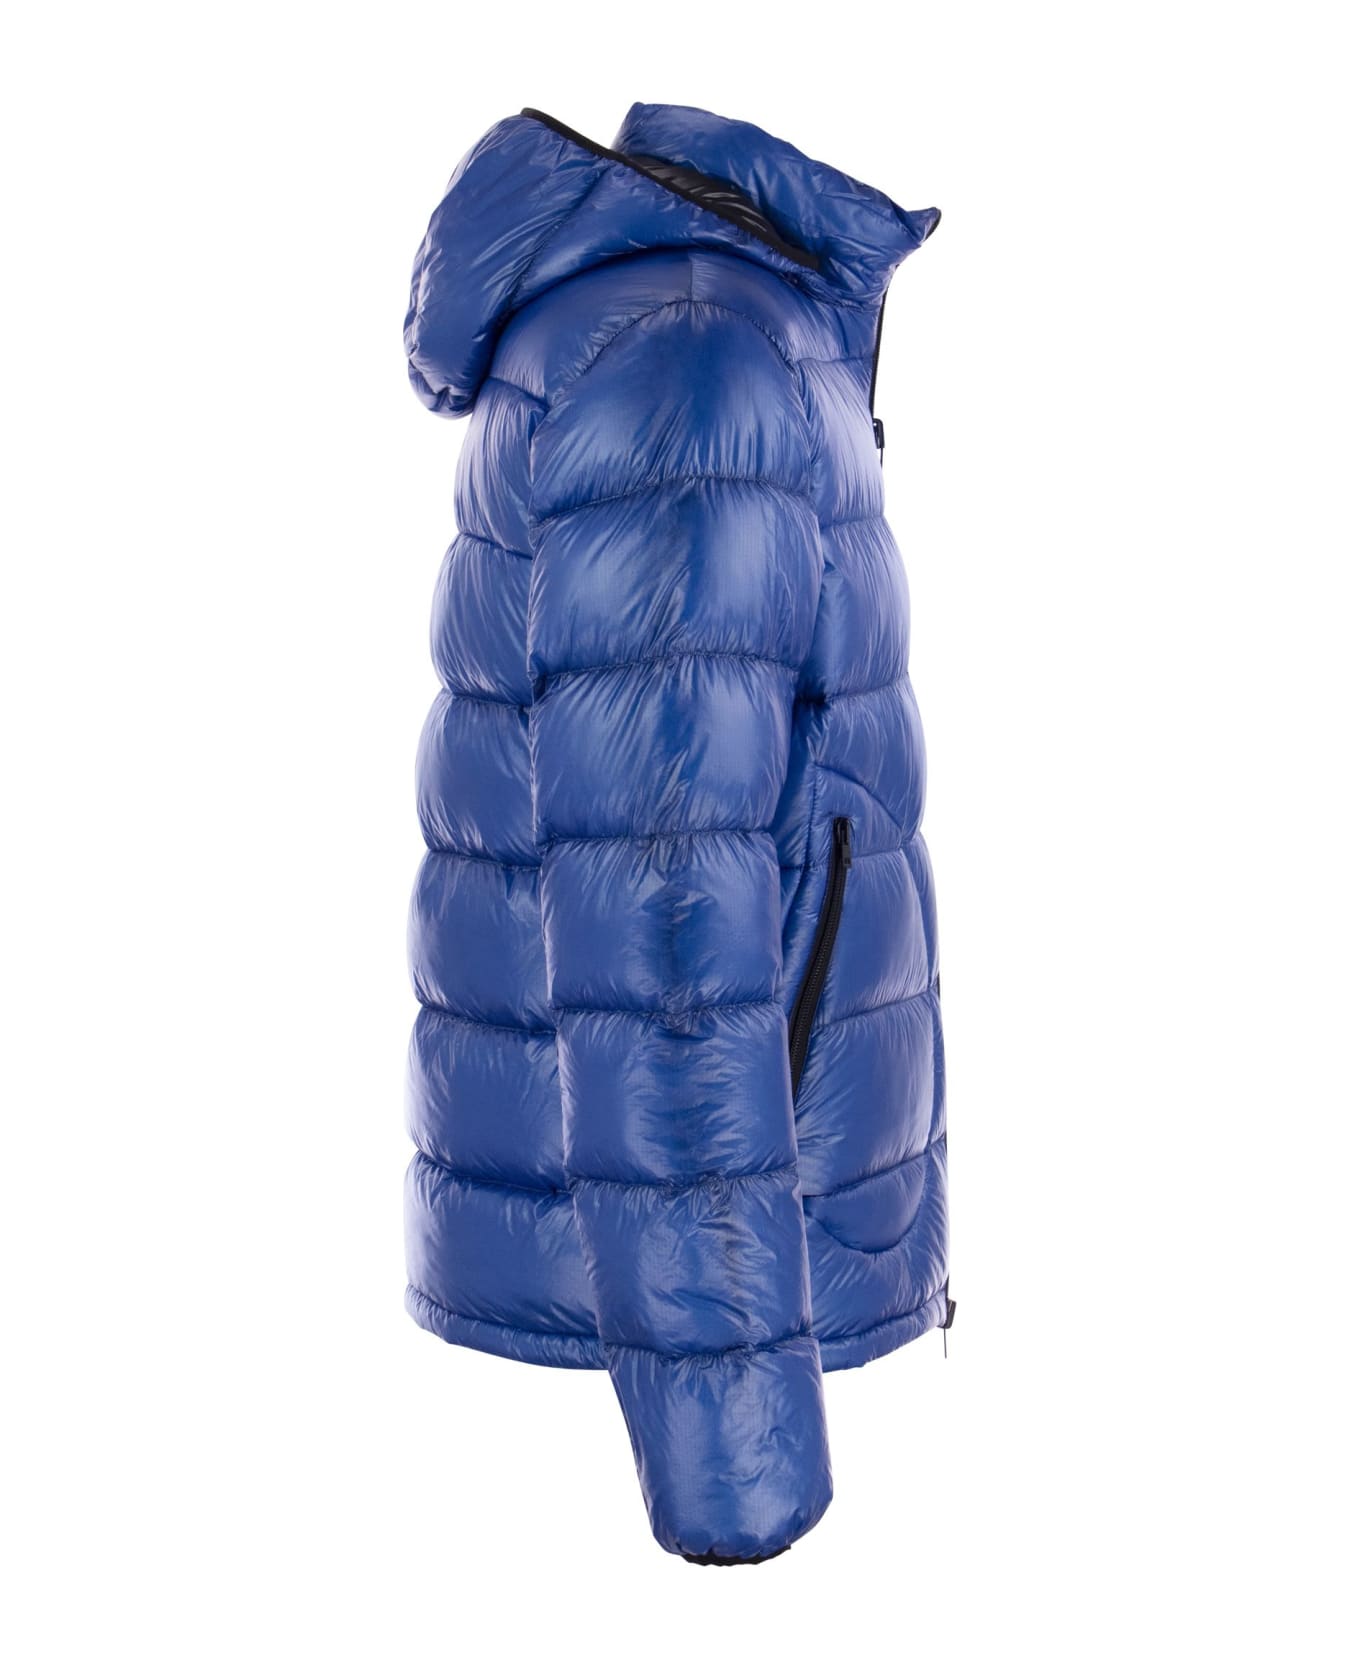 Herno Reversible Down Jacket With Hood - Bluette